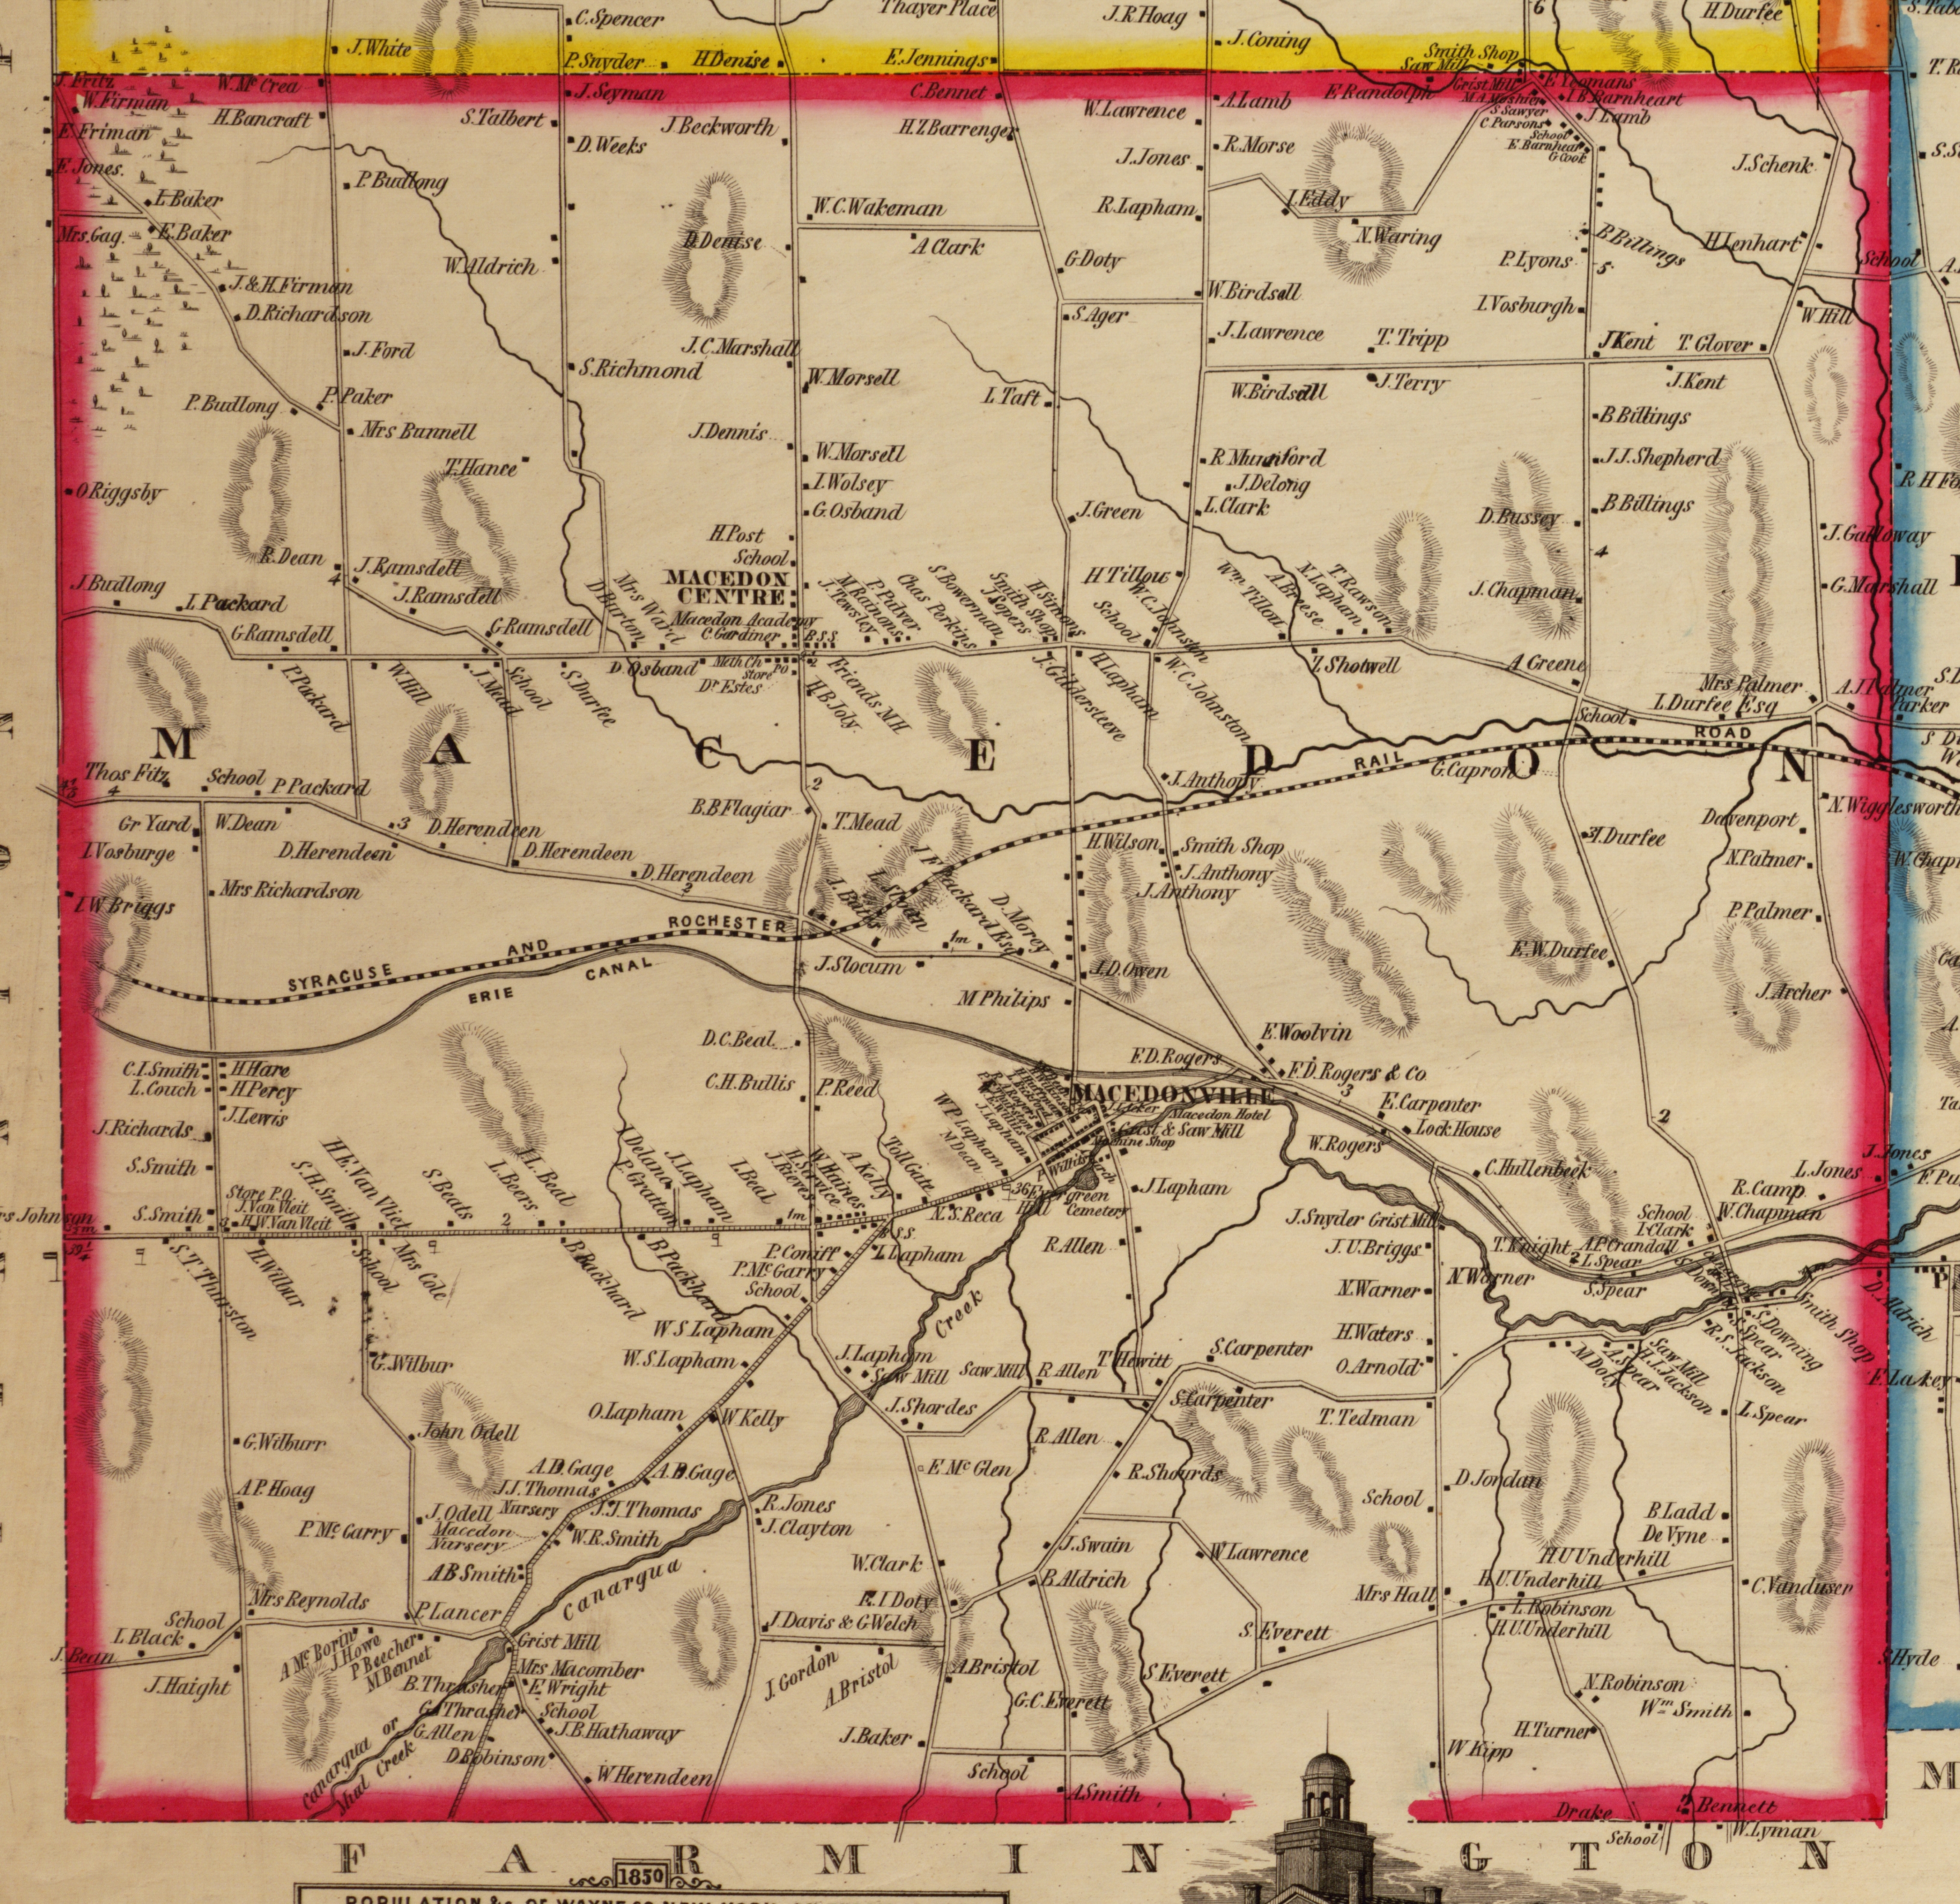 1853 H. F. Walling, wall map of Wayne County, N. Y.; Library of Congress, Geography and Map Division copy